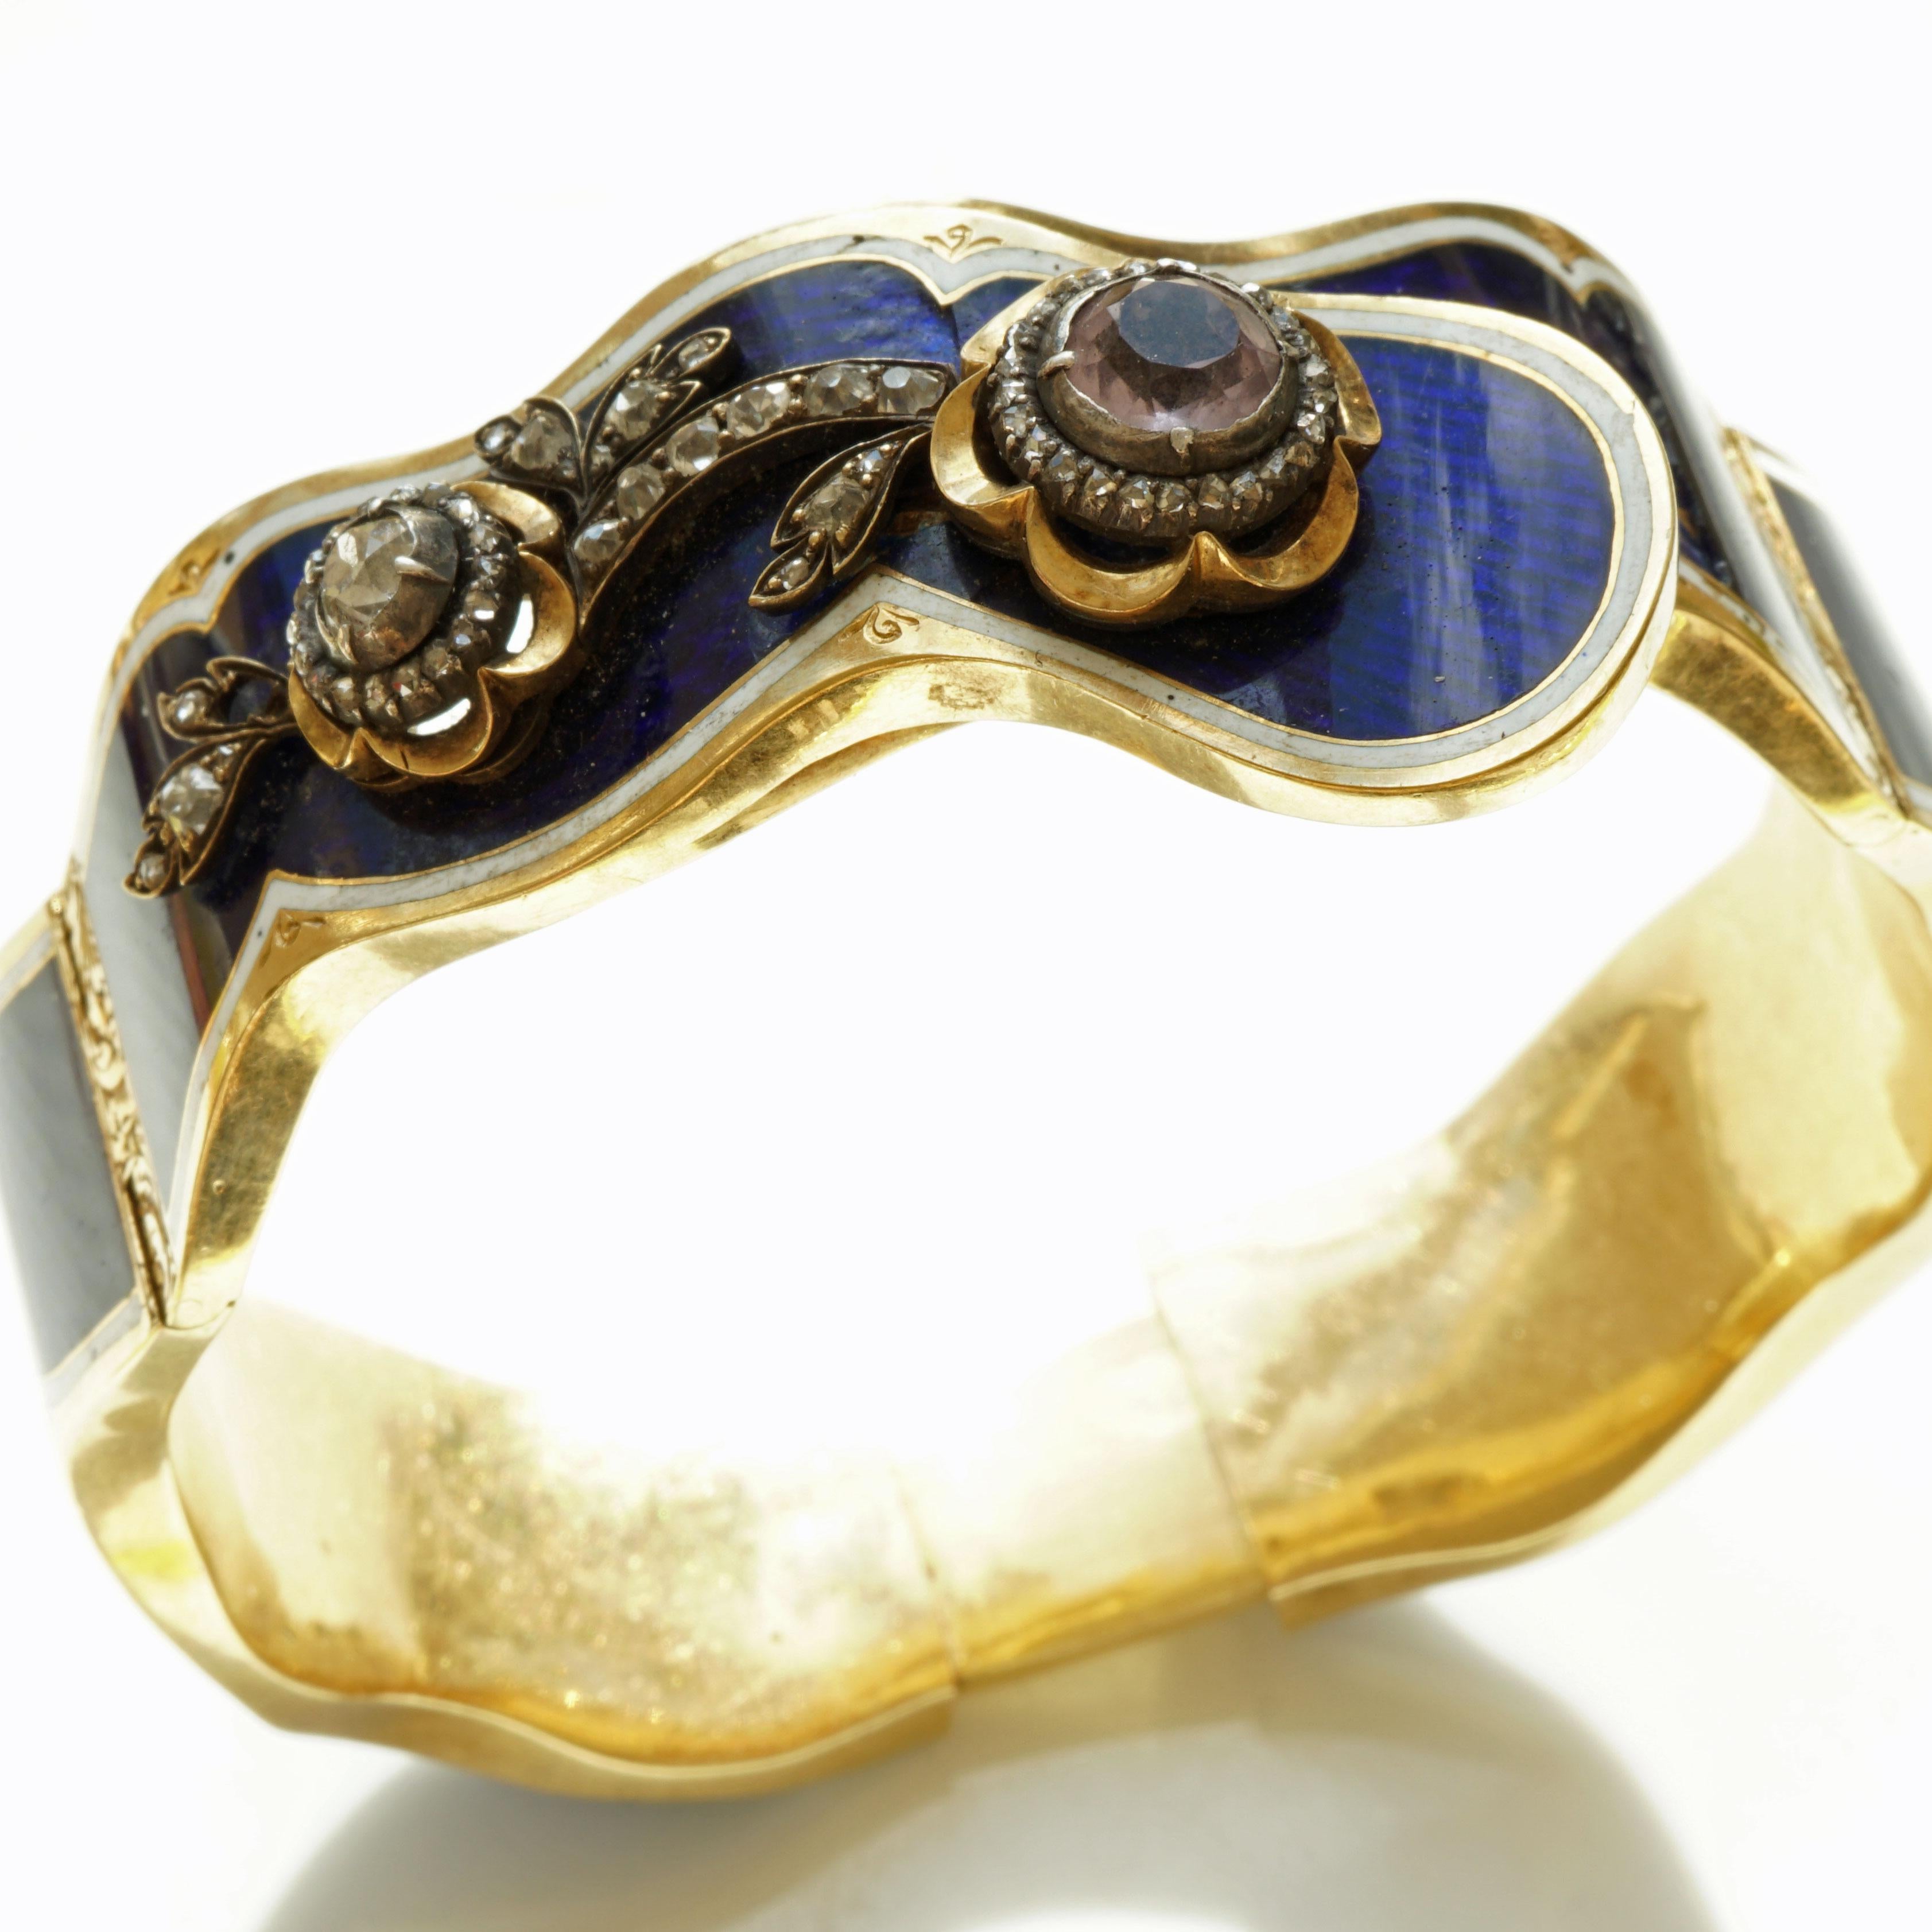 a historical bangle from the late 18th century, when enamel jewelery was very fashionable and especially the sacred MIDNIGHT BLUE in combination with WHITE and glittering diamonds, a man-made starry sky in the form of a piece of jewellery, simply